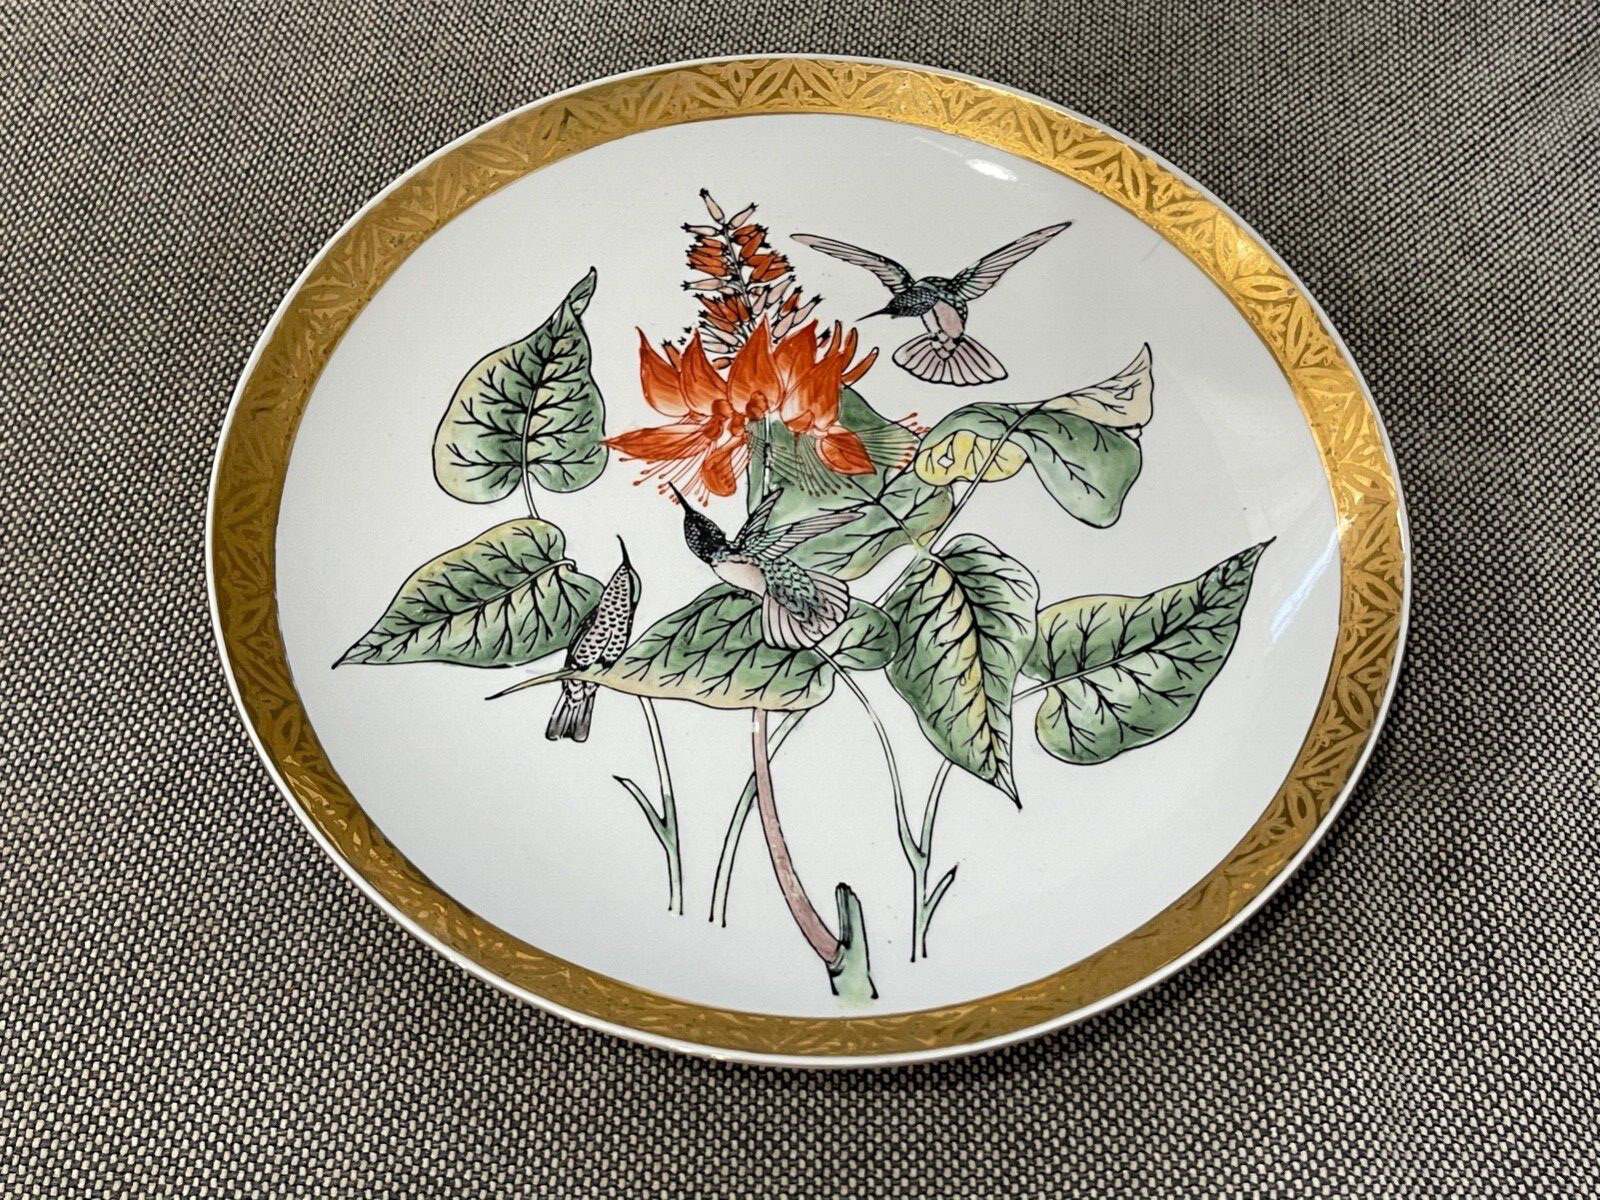 Vintage Chinese China Trader Porcelain Plate w Hummingbirds & Floral Decoration